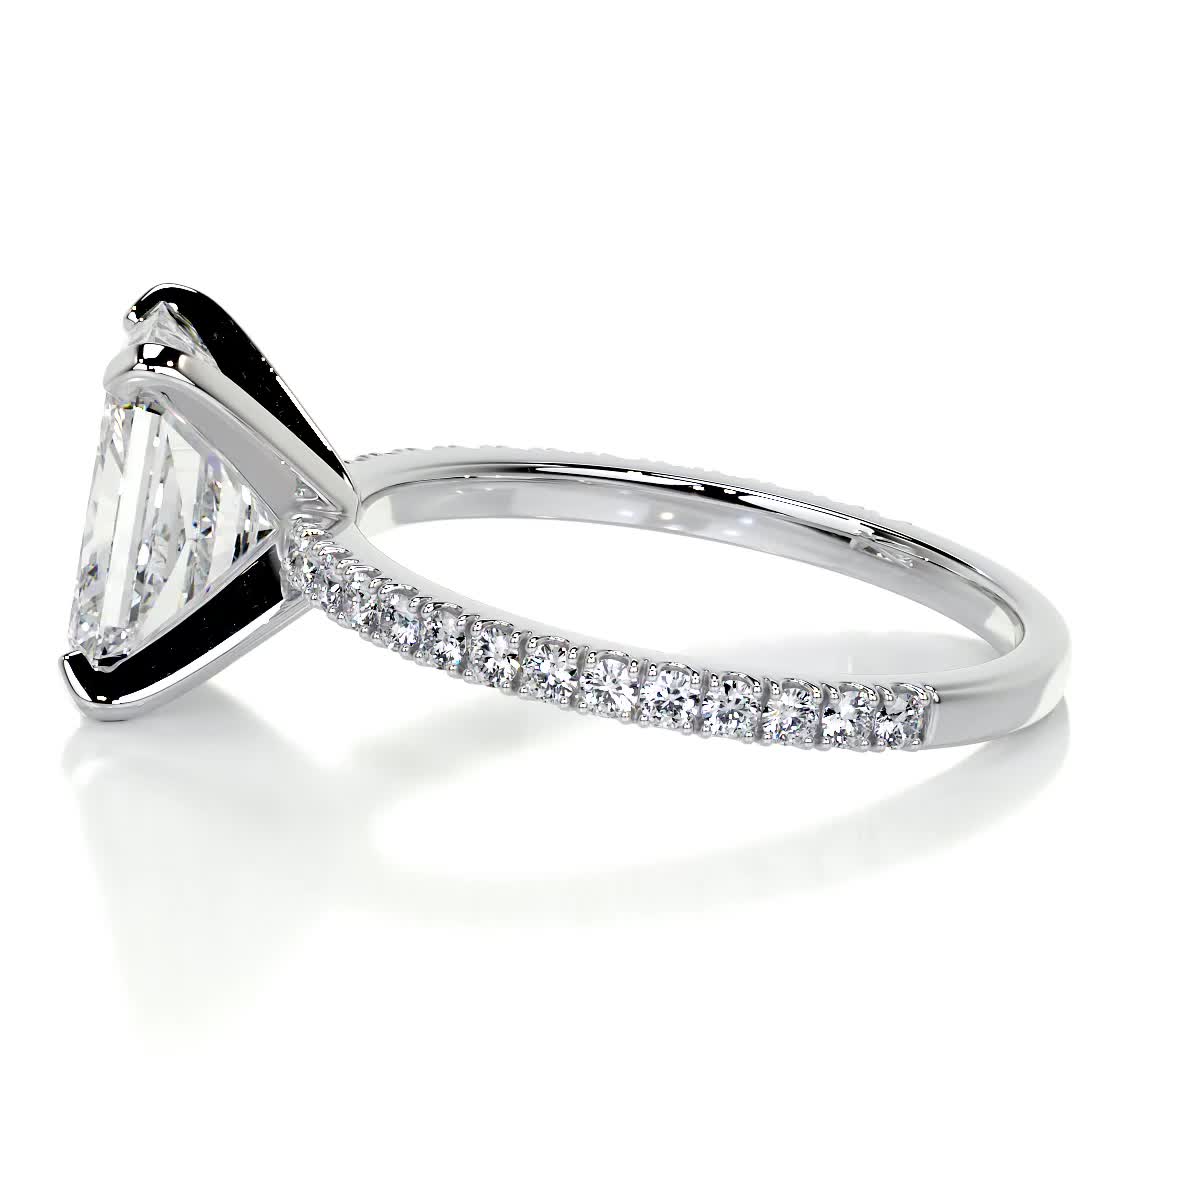 3.0 CT Radiant Solitaire CVD G/SI1 Diamond Engagement Ring 4